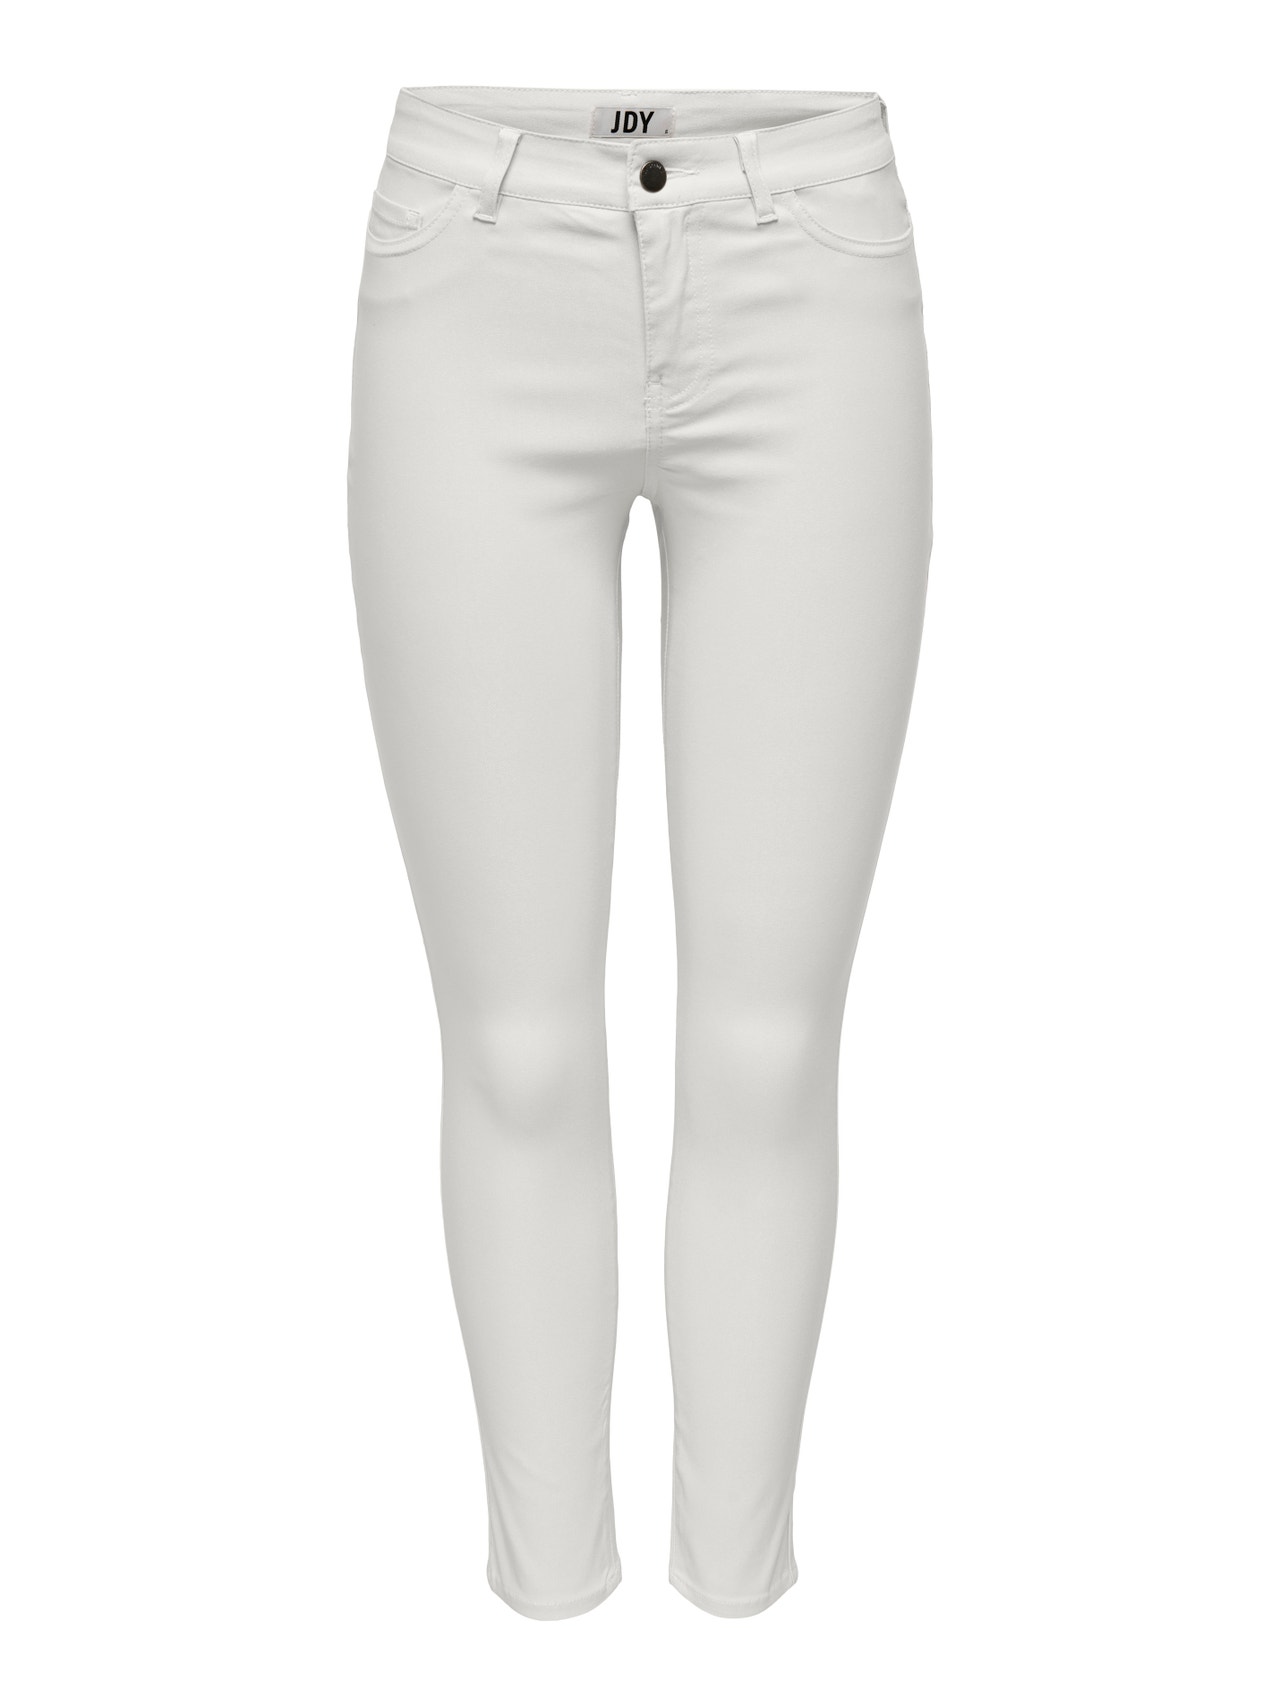 ONLY Skinny trousers with mid waist -Cloud Dancer - 15291267